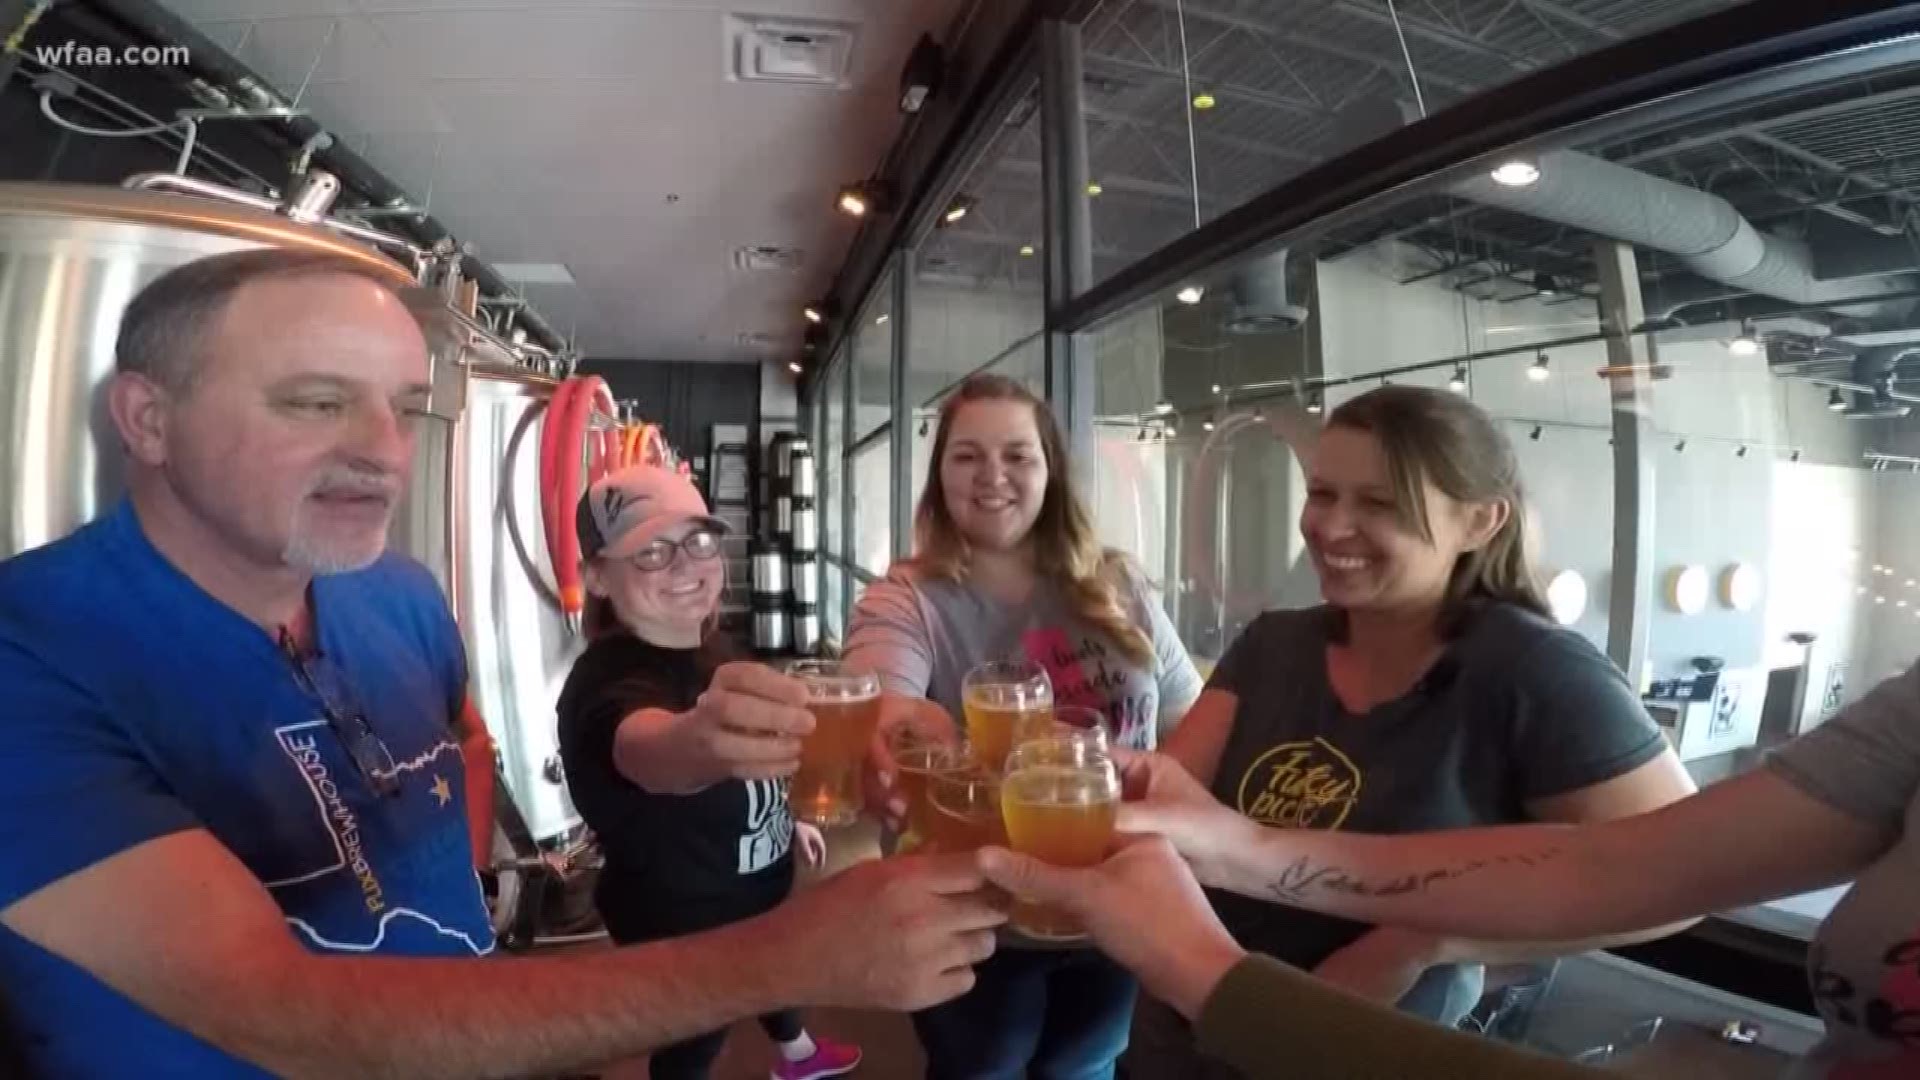 Samantha Glenn is a biomedical engineer who's making her dream come true by opening a brewpub. WFAA's Kara Sewell has her story.